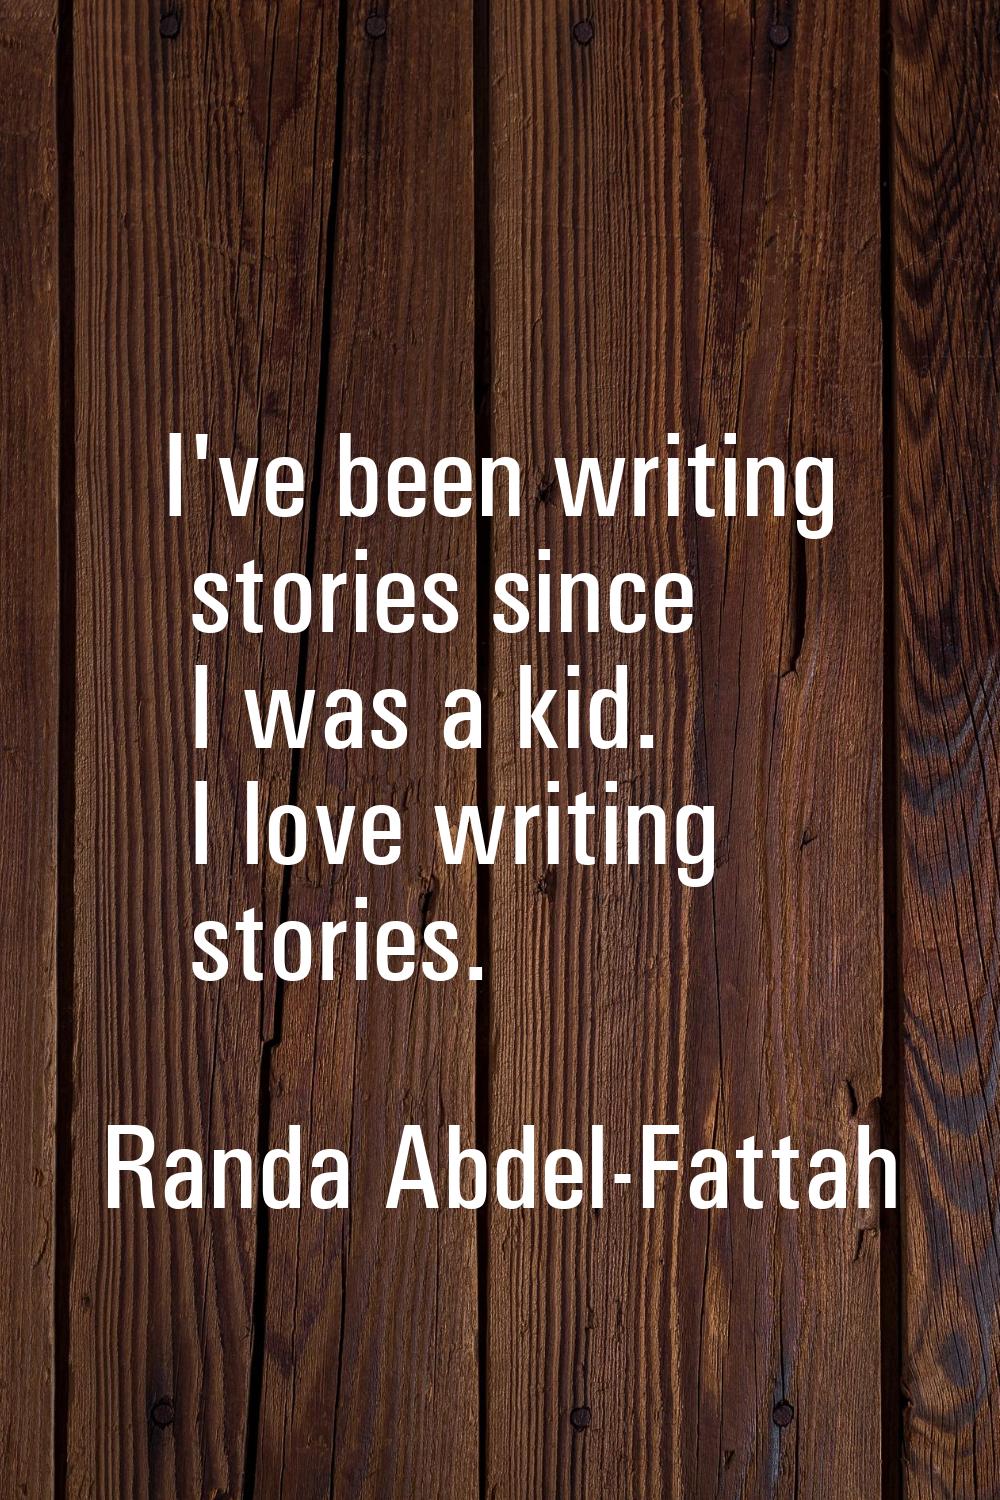 I've been writing stories since I was a kid. I love writing stories.